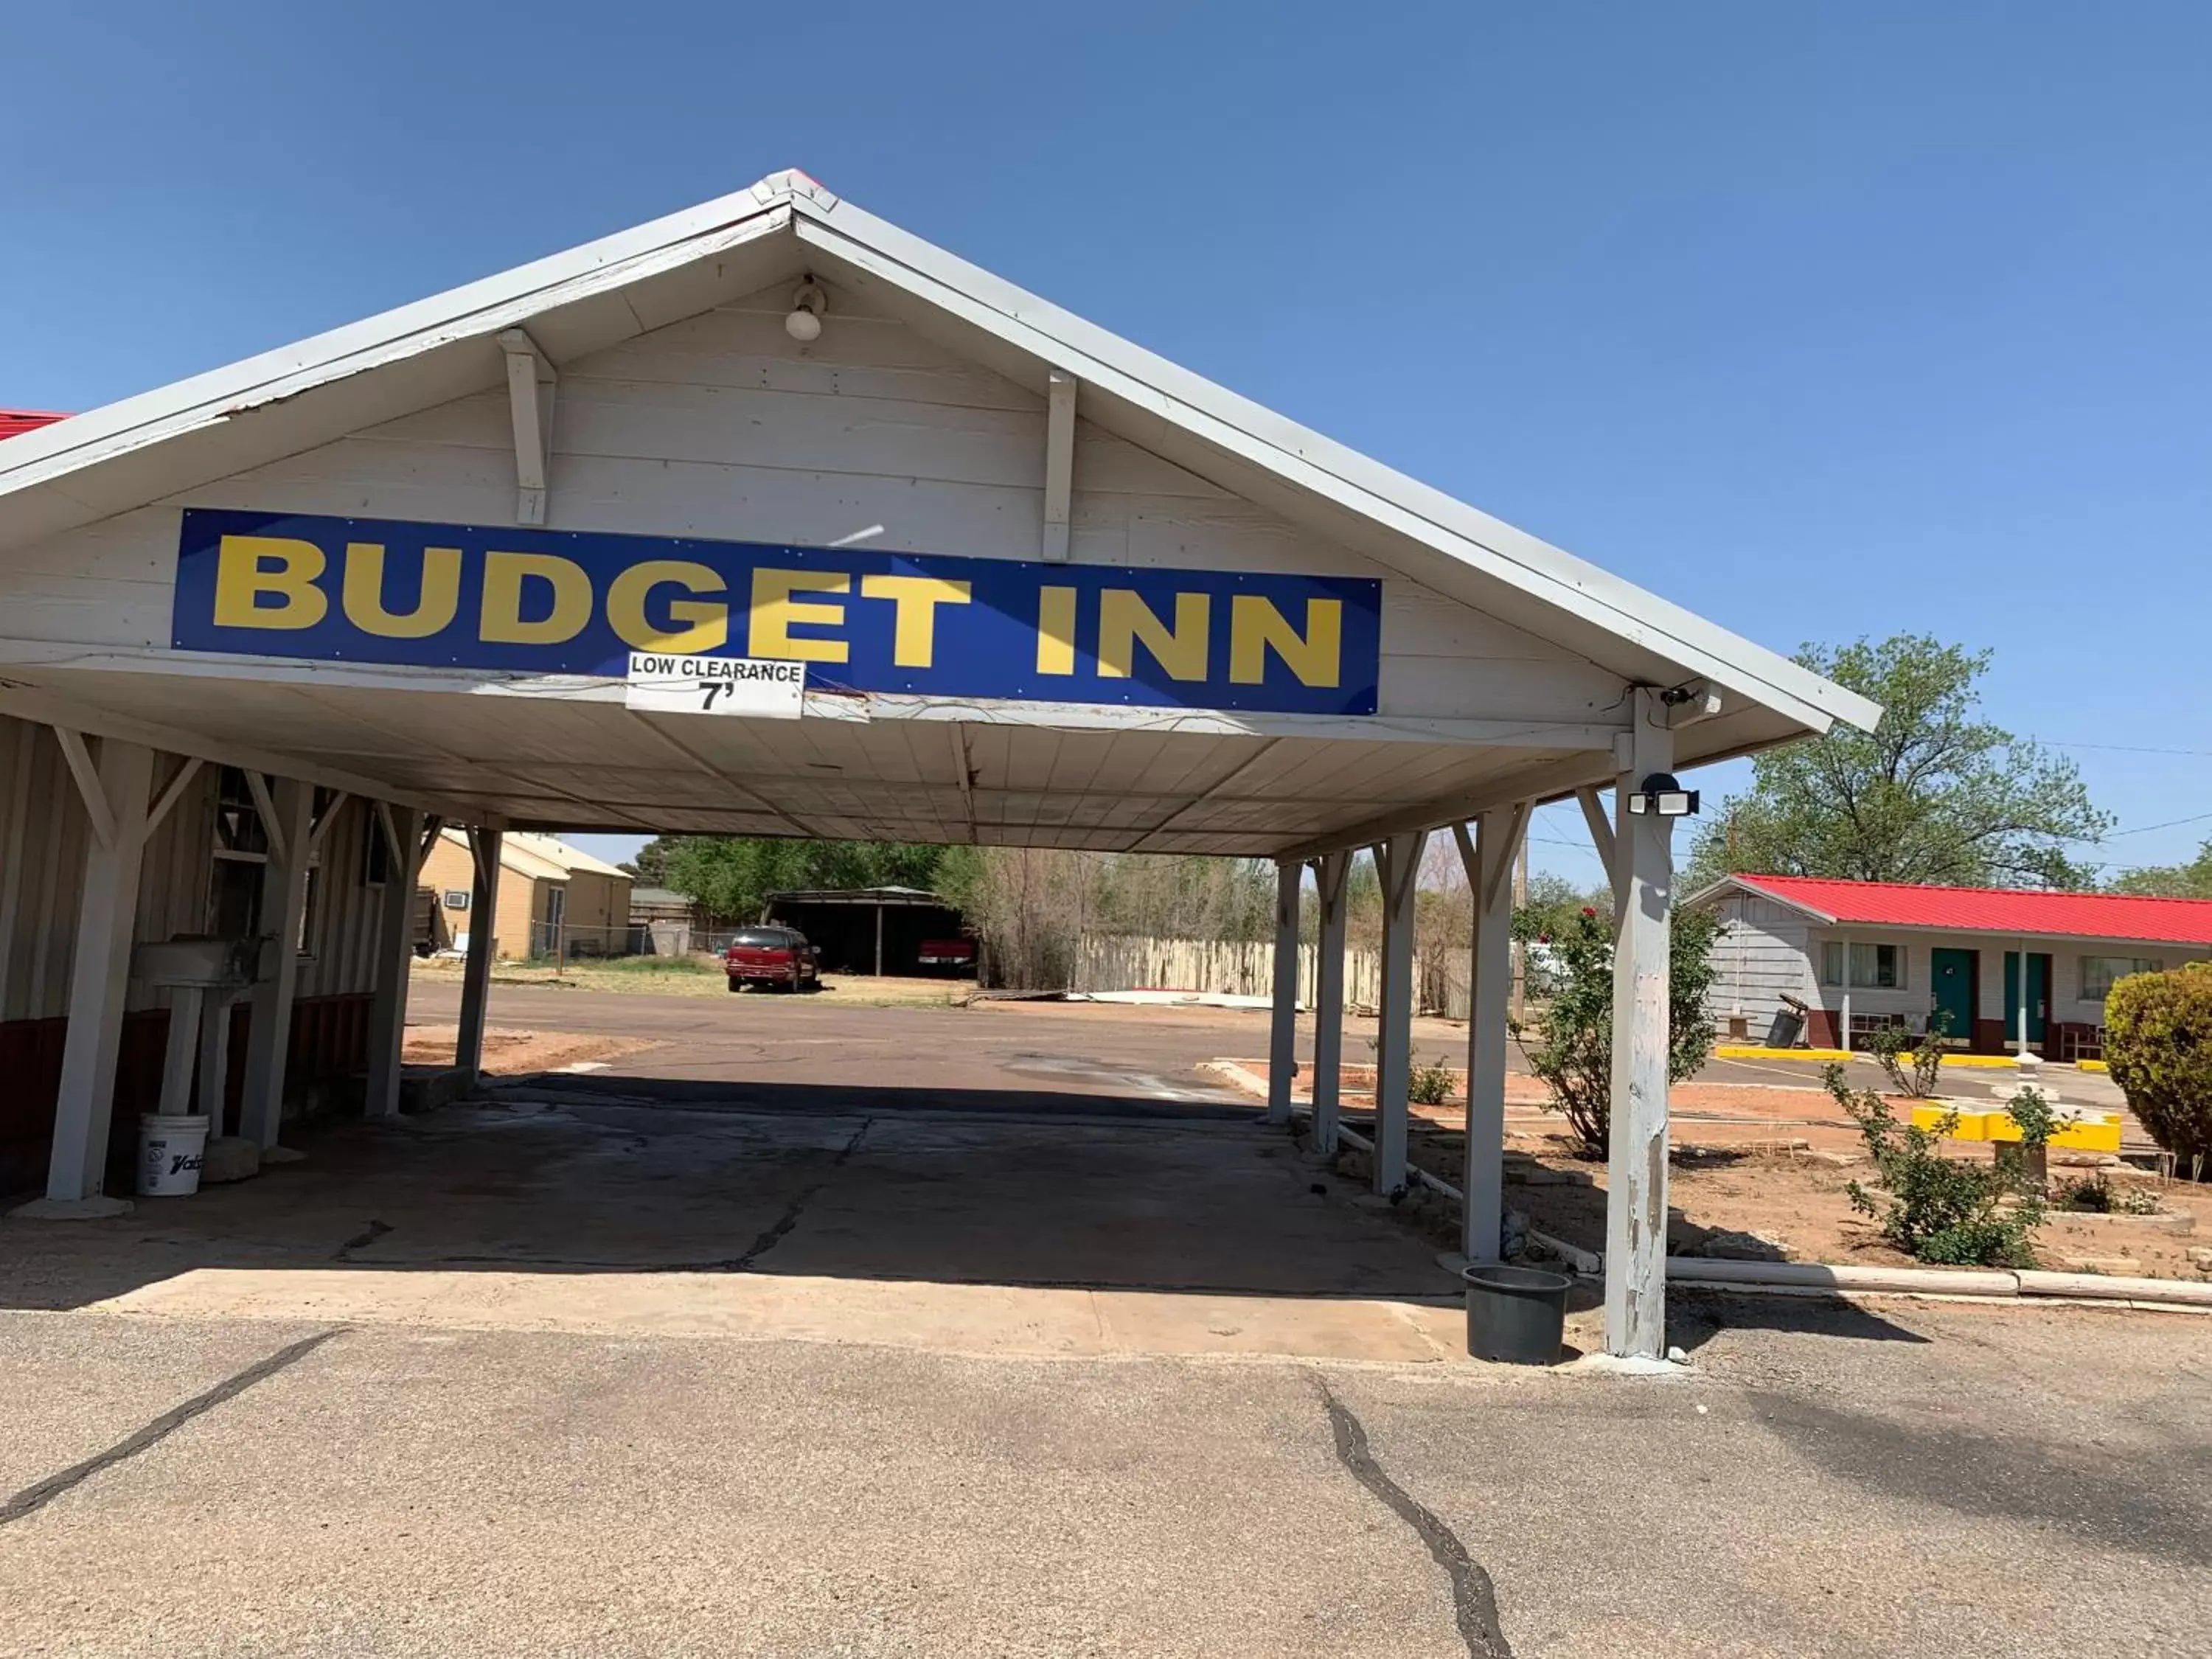 Property Building in Budget Inn